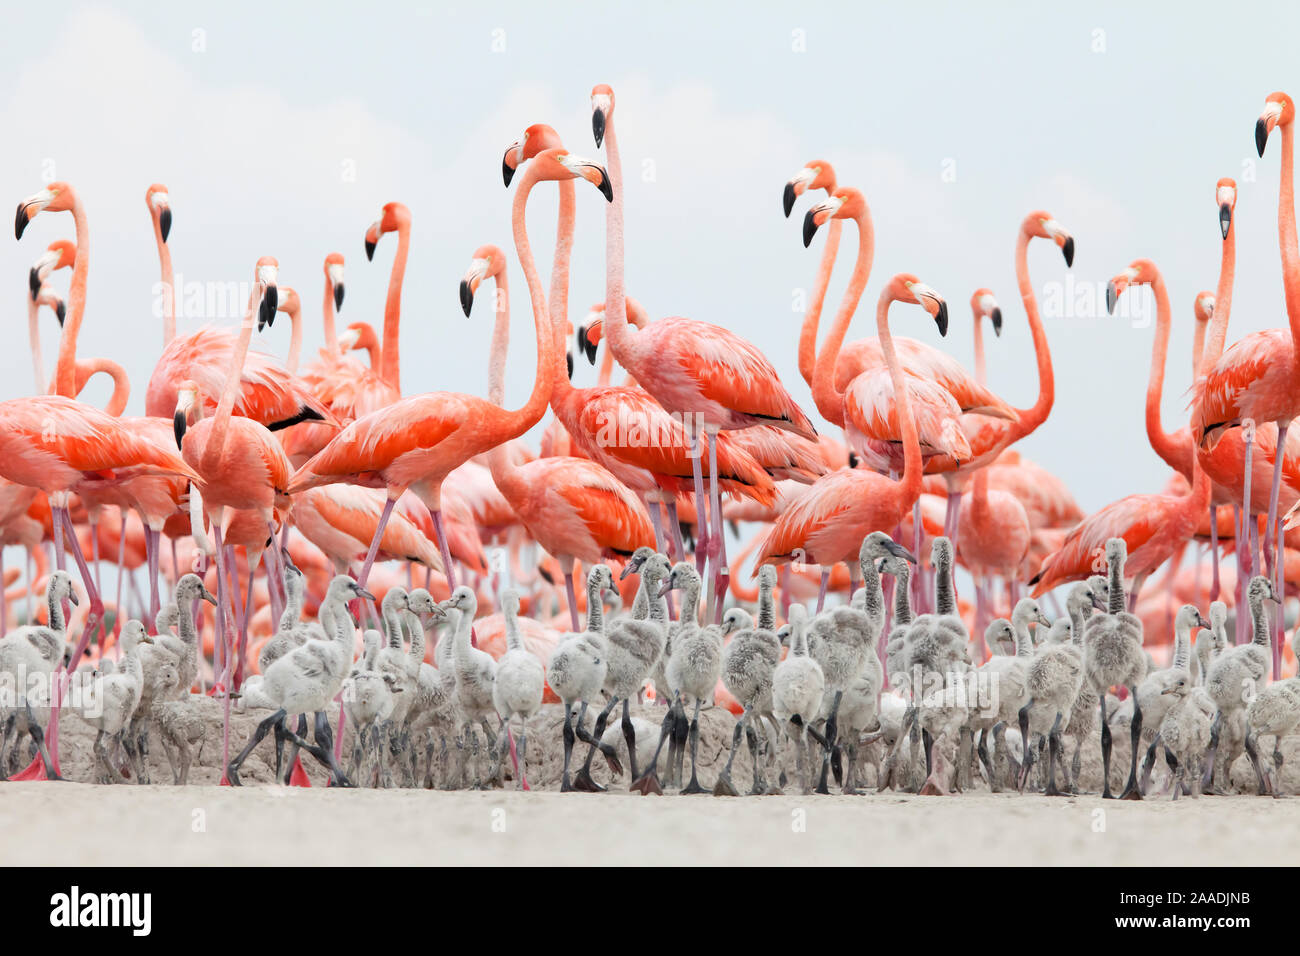 Caribbean Flamingo (Phoenicopterus ruber) chick crÃ¨che in front of attentive adult flamingo group, breeding colony, Ria Lagartos Biosphere Reserve, Yucatan Peninsula, Mexico, June, Finalist in the Portfolio Category of the Terre Sauvage Nature Images Awards 2017 Stock Photo